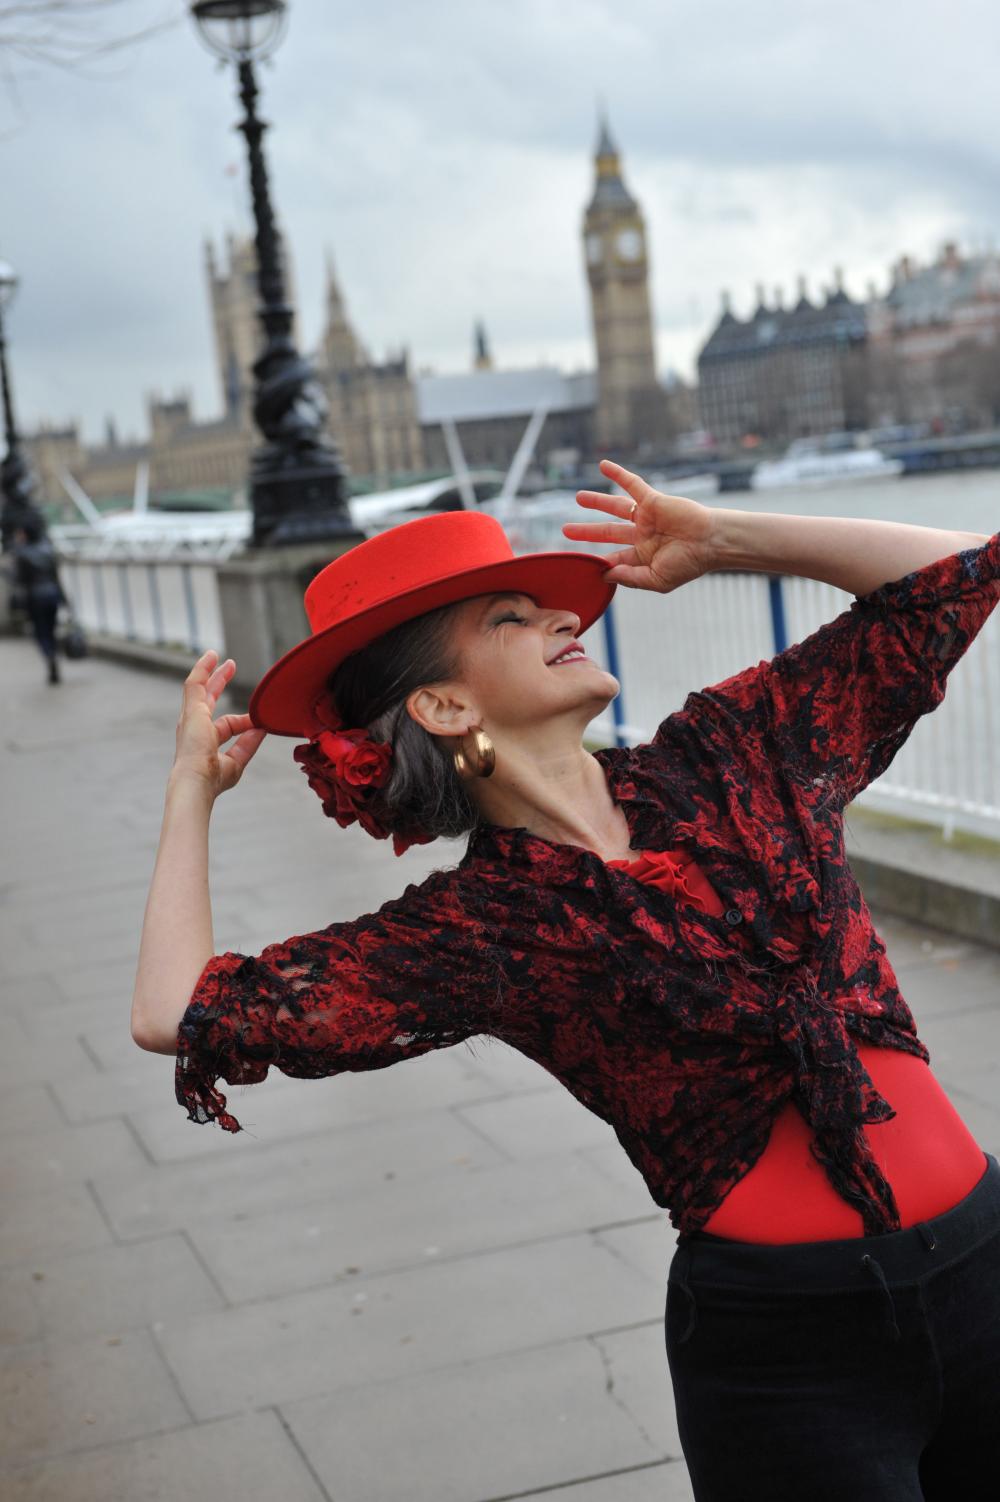 Danielle, of Flamenco Con Gusto, poses in a bright red flamenco hat, on the Southbank, with Big Ben in the background